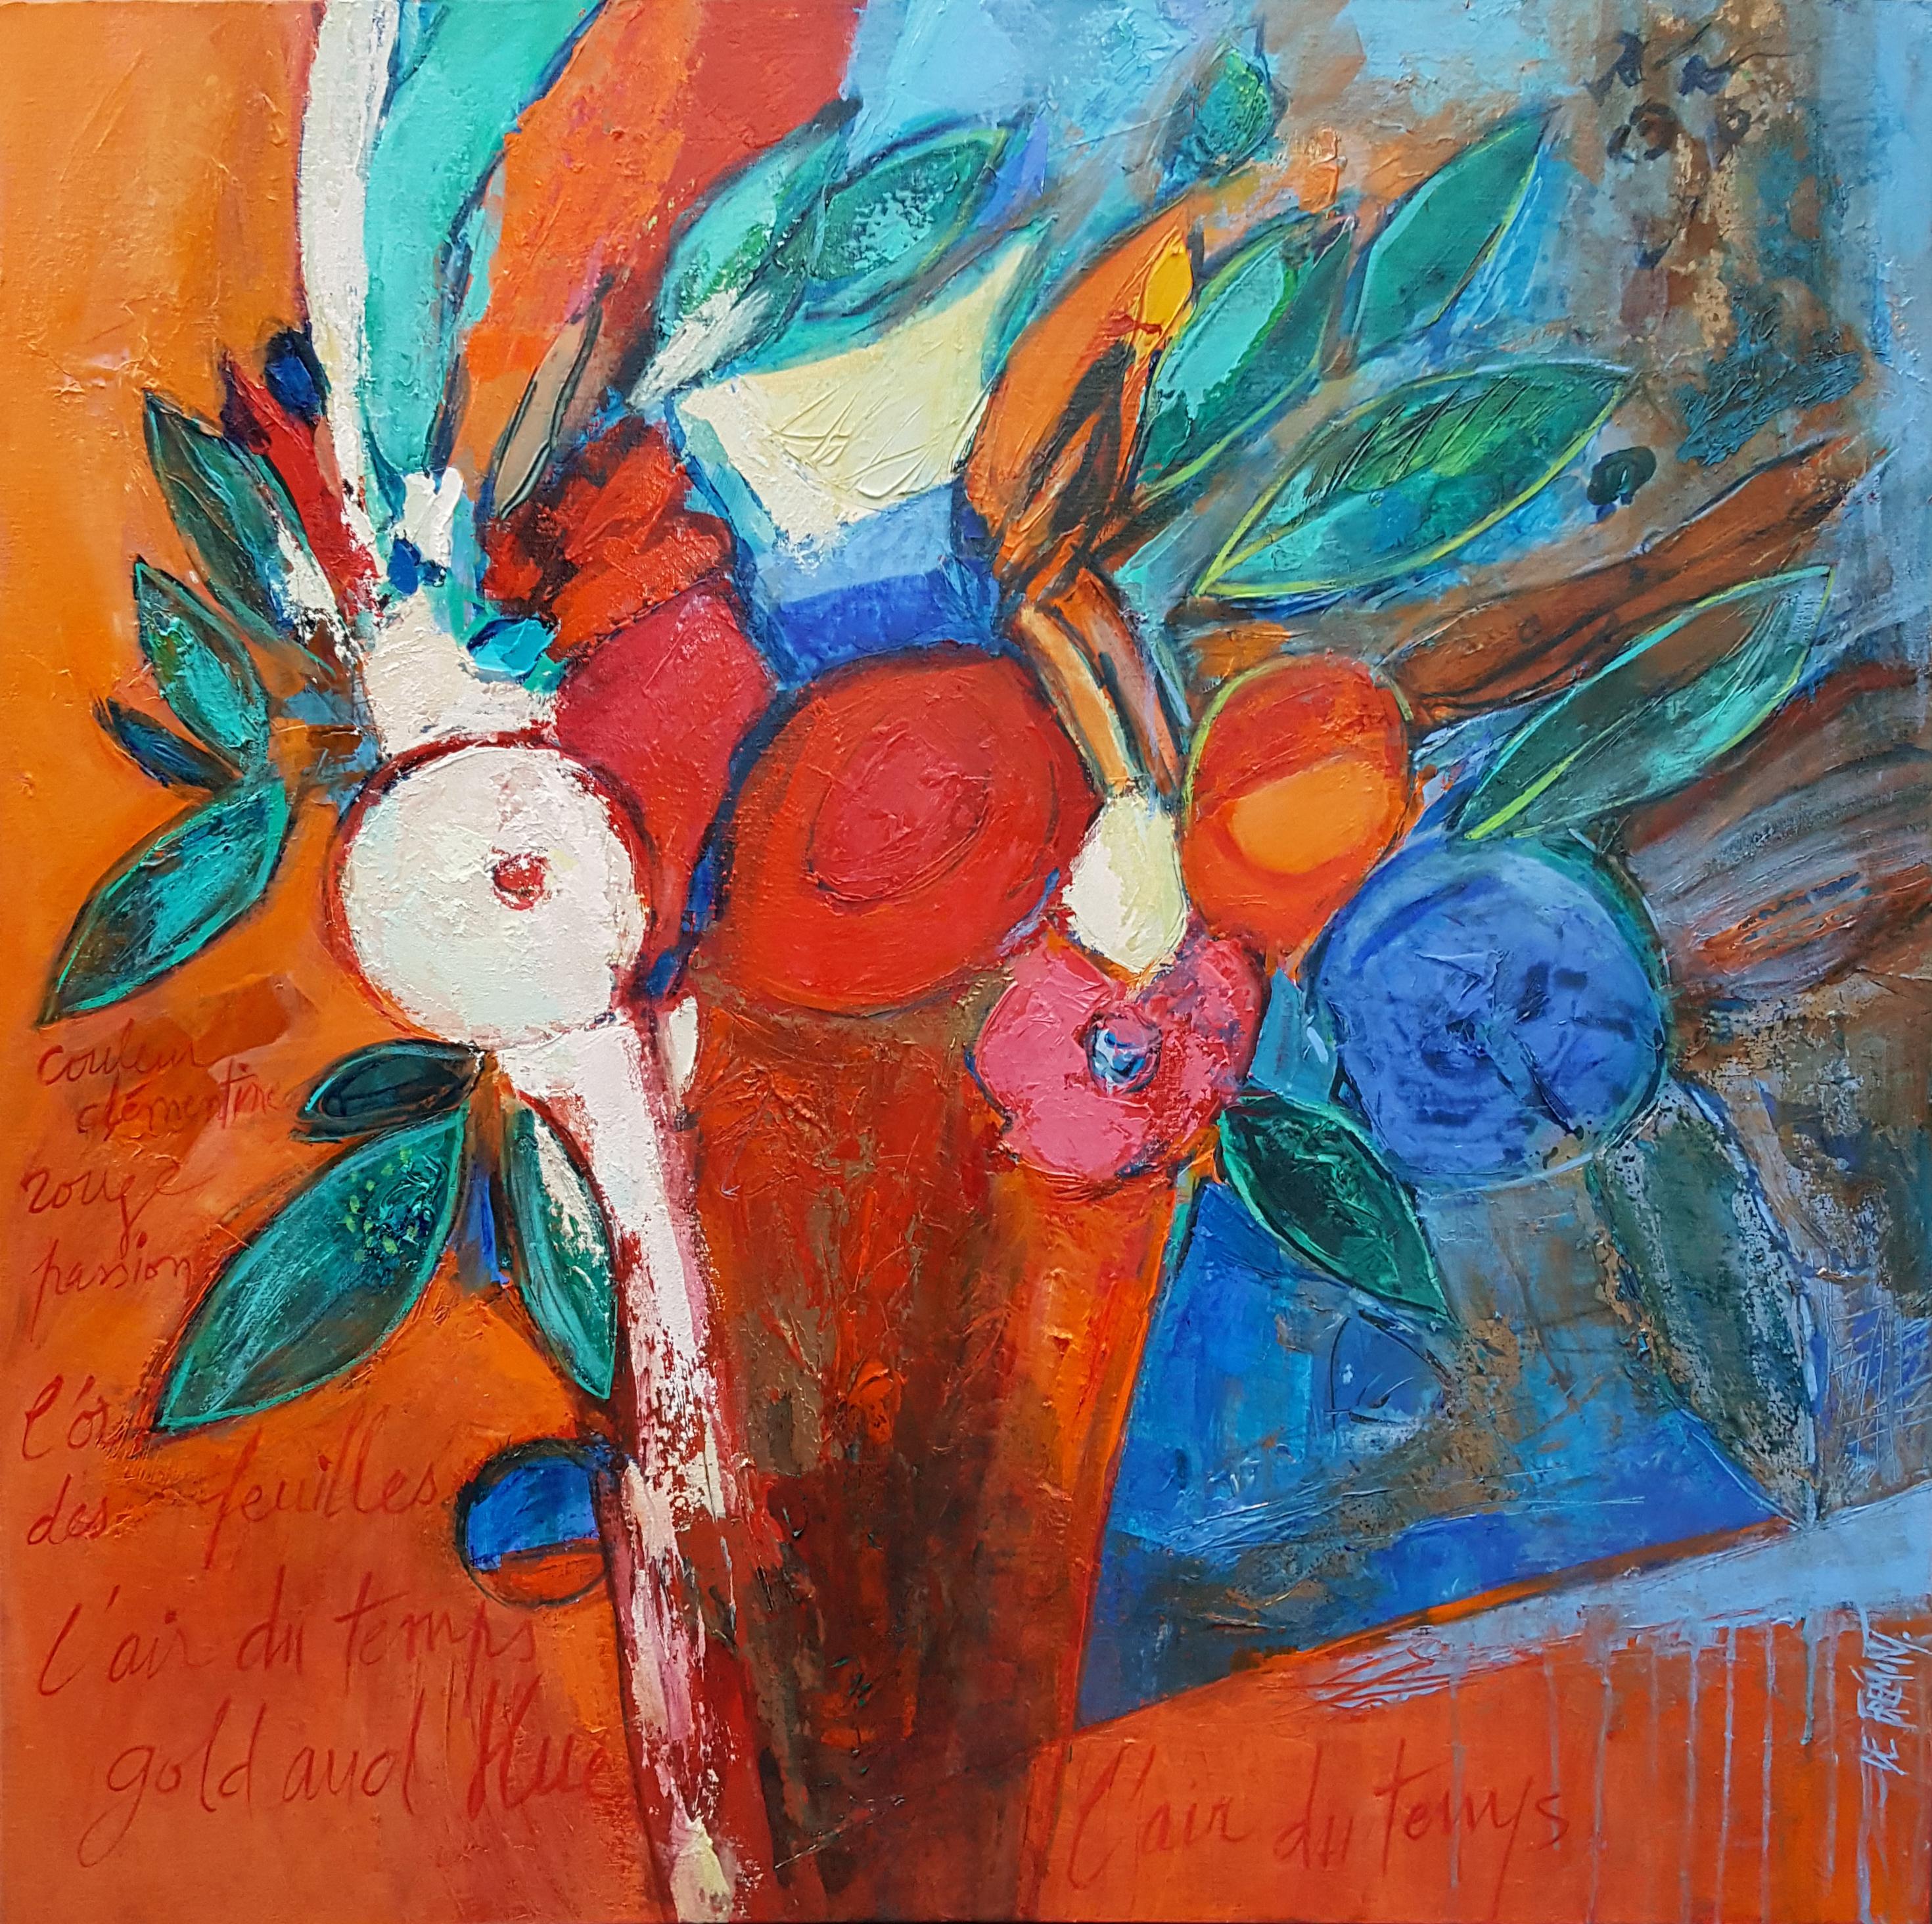 Andrée de Frémont Still-Life Painting - "Mood of the times", Blue Oranges Empowering Floral Bouquet Abstract Painting